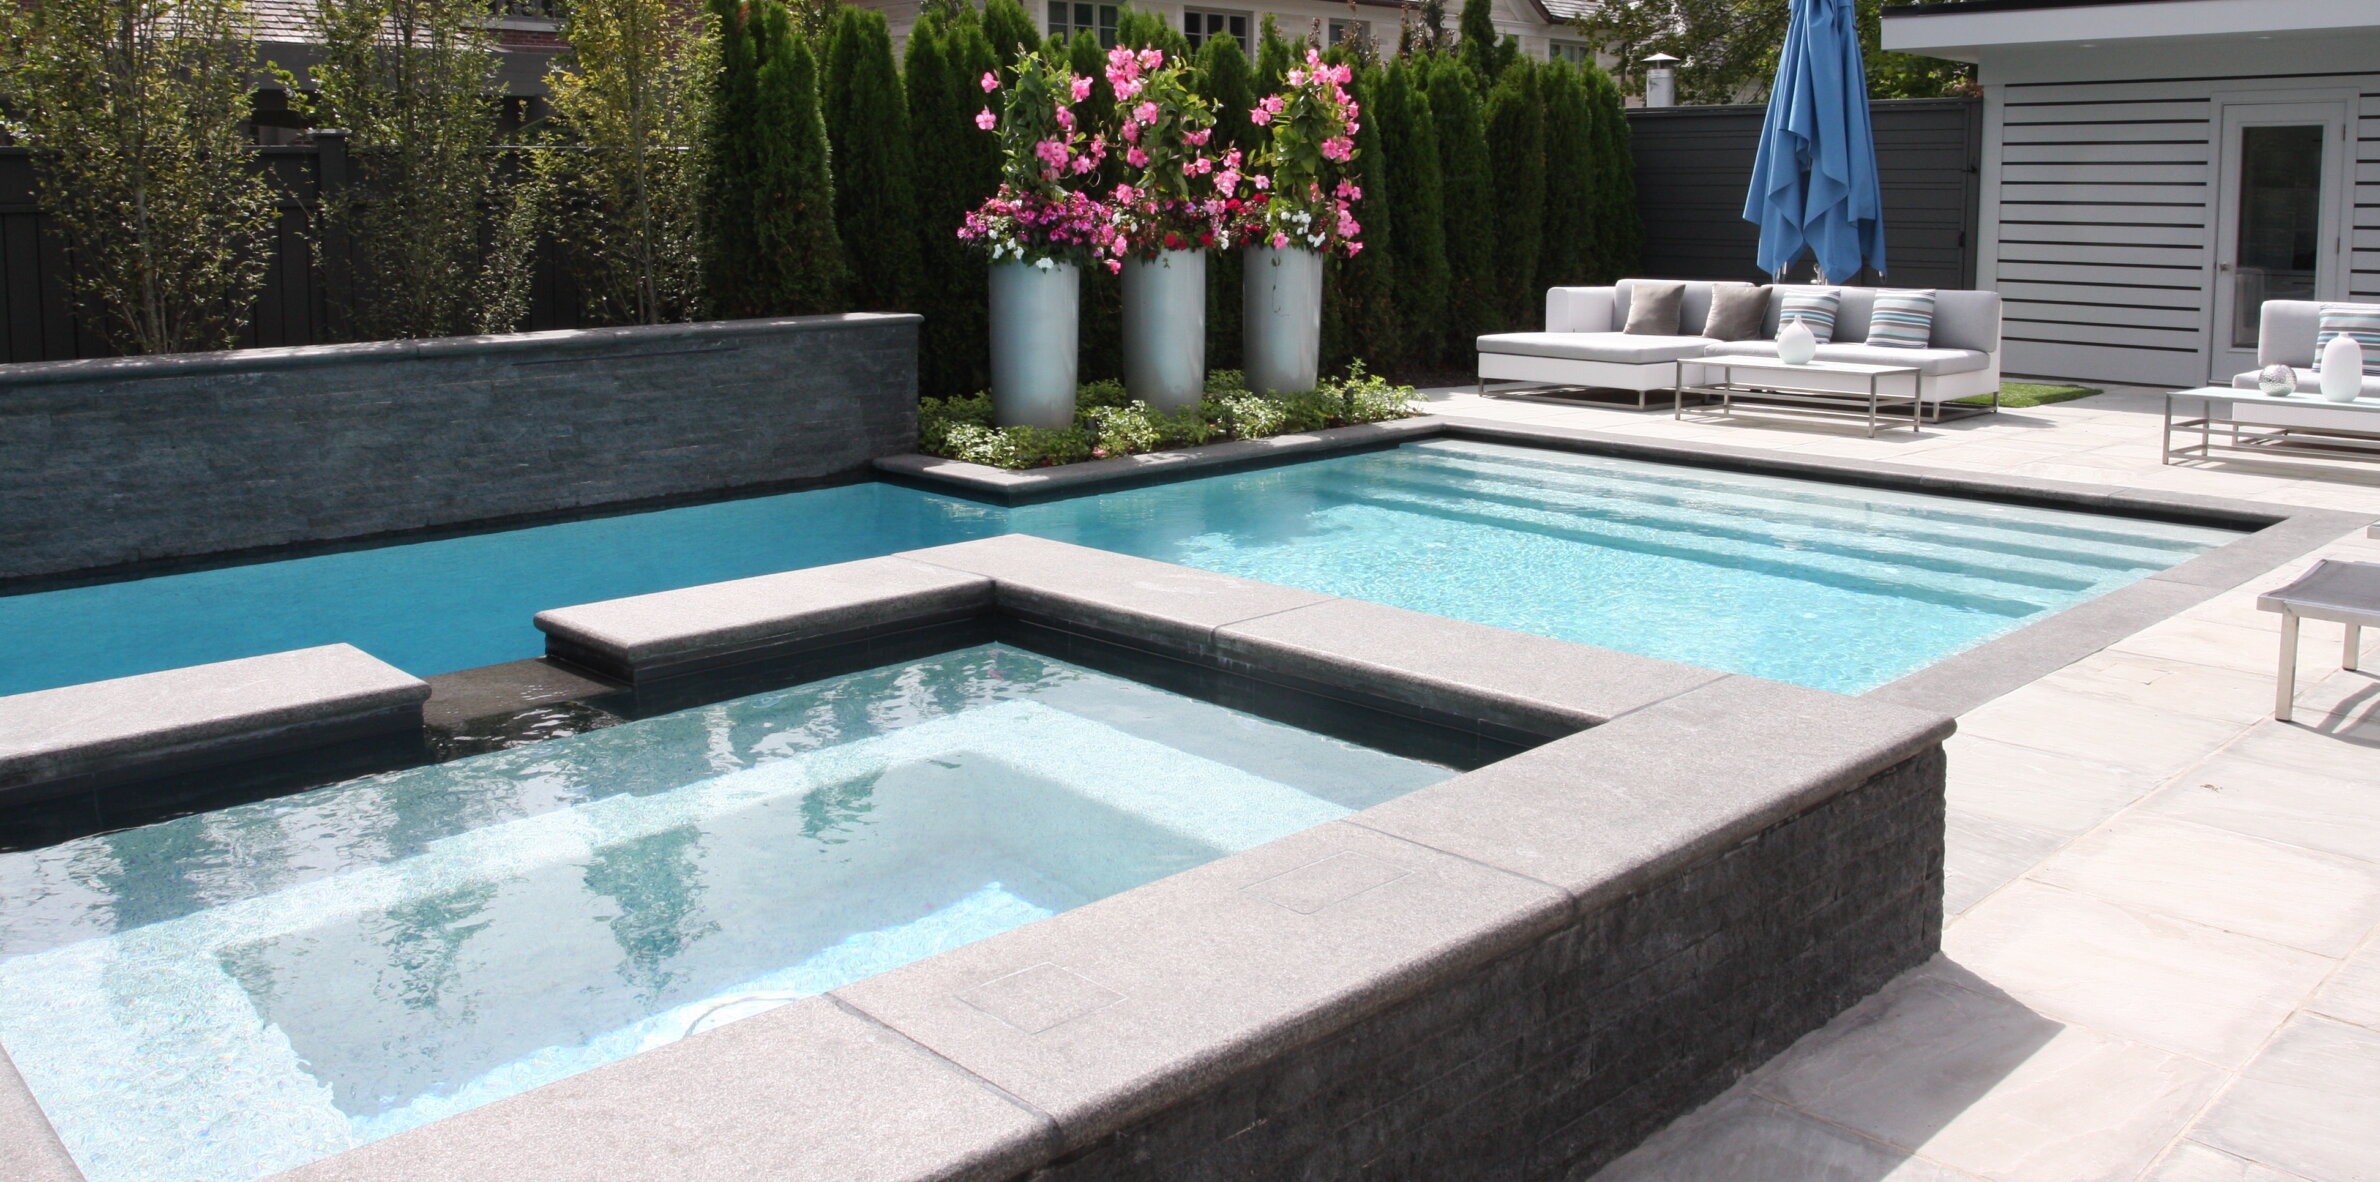 An elegant backyard with a blue swimming pool, surrounded by stone tile, large planters with pink flowers, lounge furniture, and a blue umbrella.